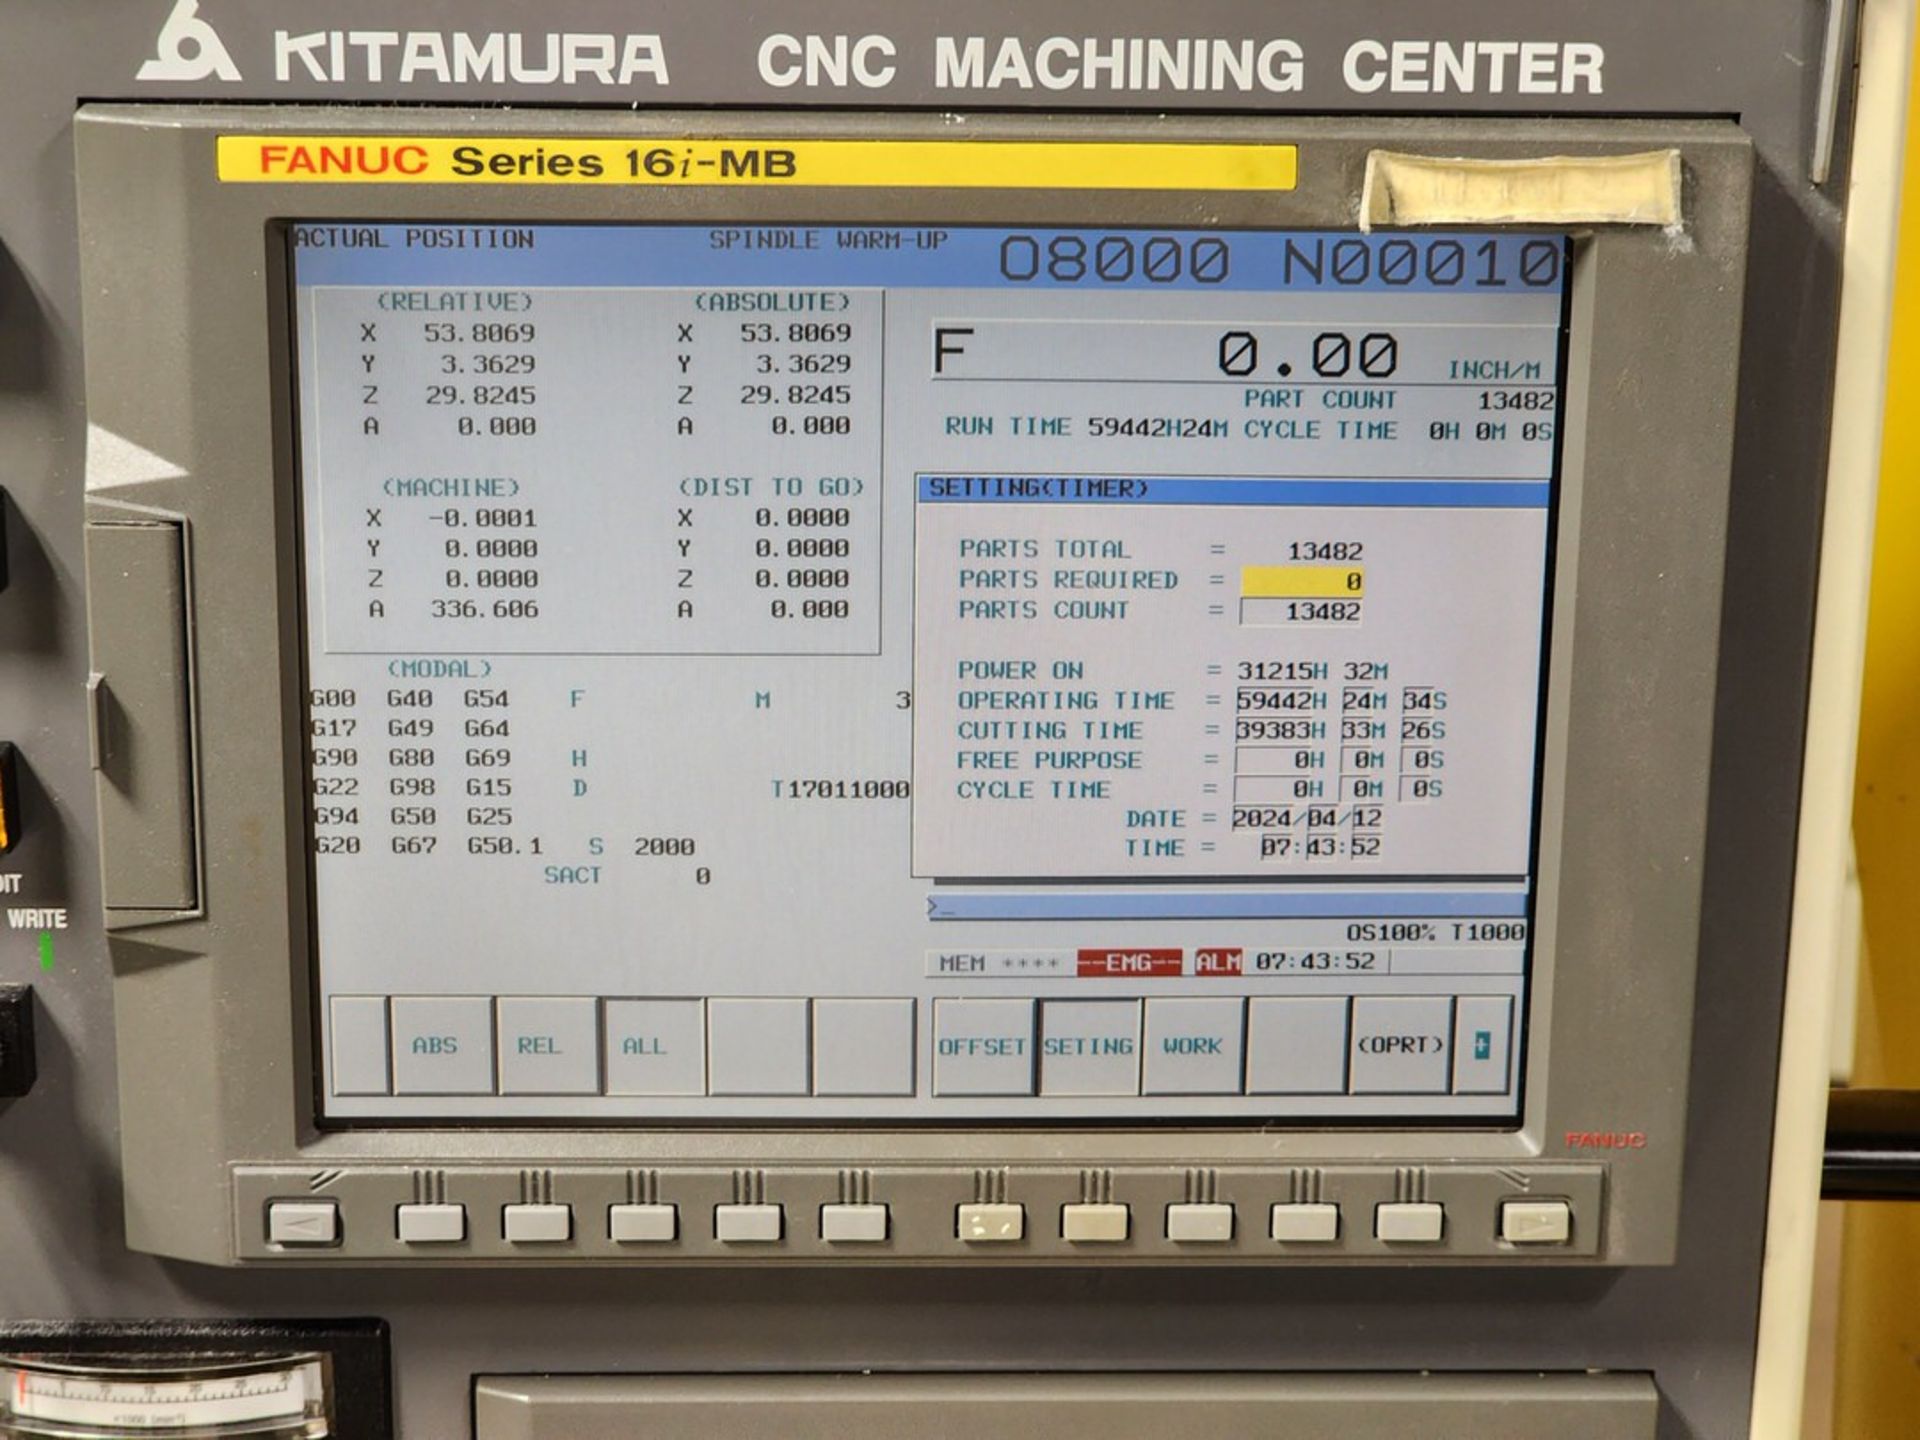 2008 Kitamura 7HiF Vertical Machining Center W/ Fanuc Series 16i-MB; 30,000 Spindle Speed; - Image 23 of 23